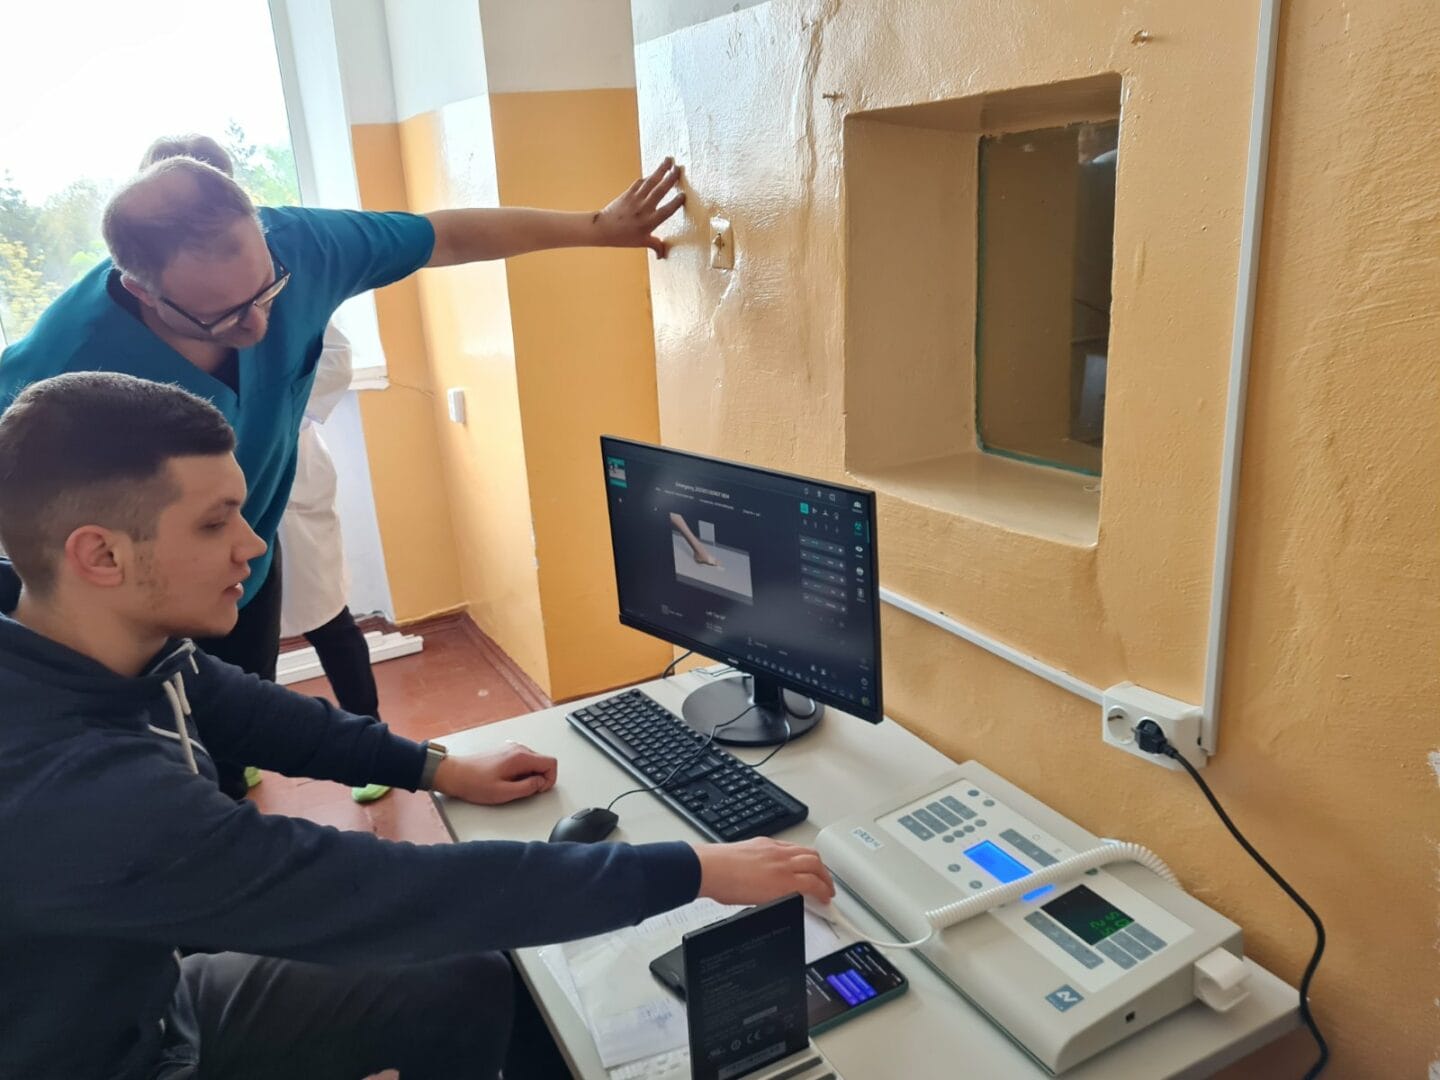  The employees of the Kamianka Multidisciplinary Hospital learning the design and operation of the X-ray machine